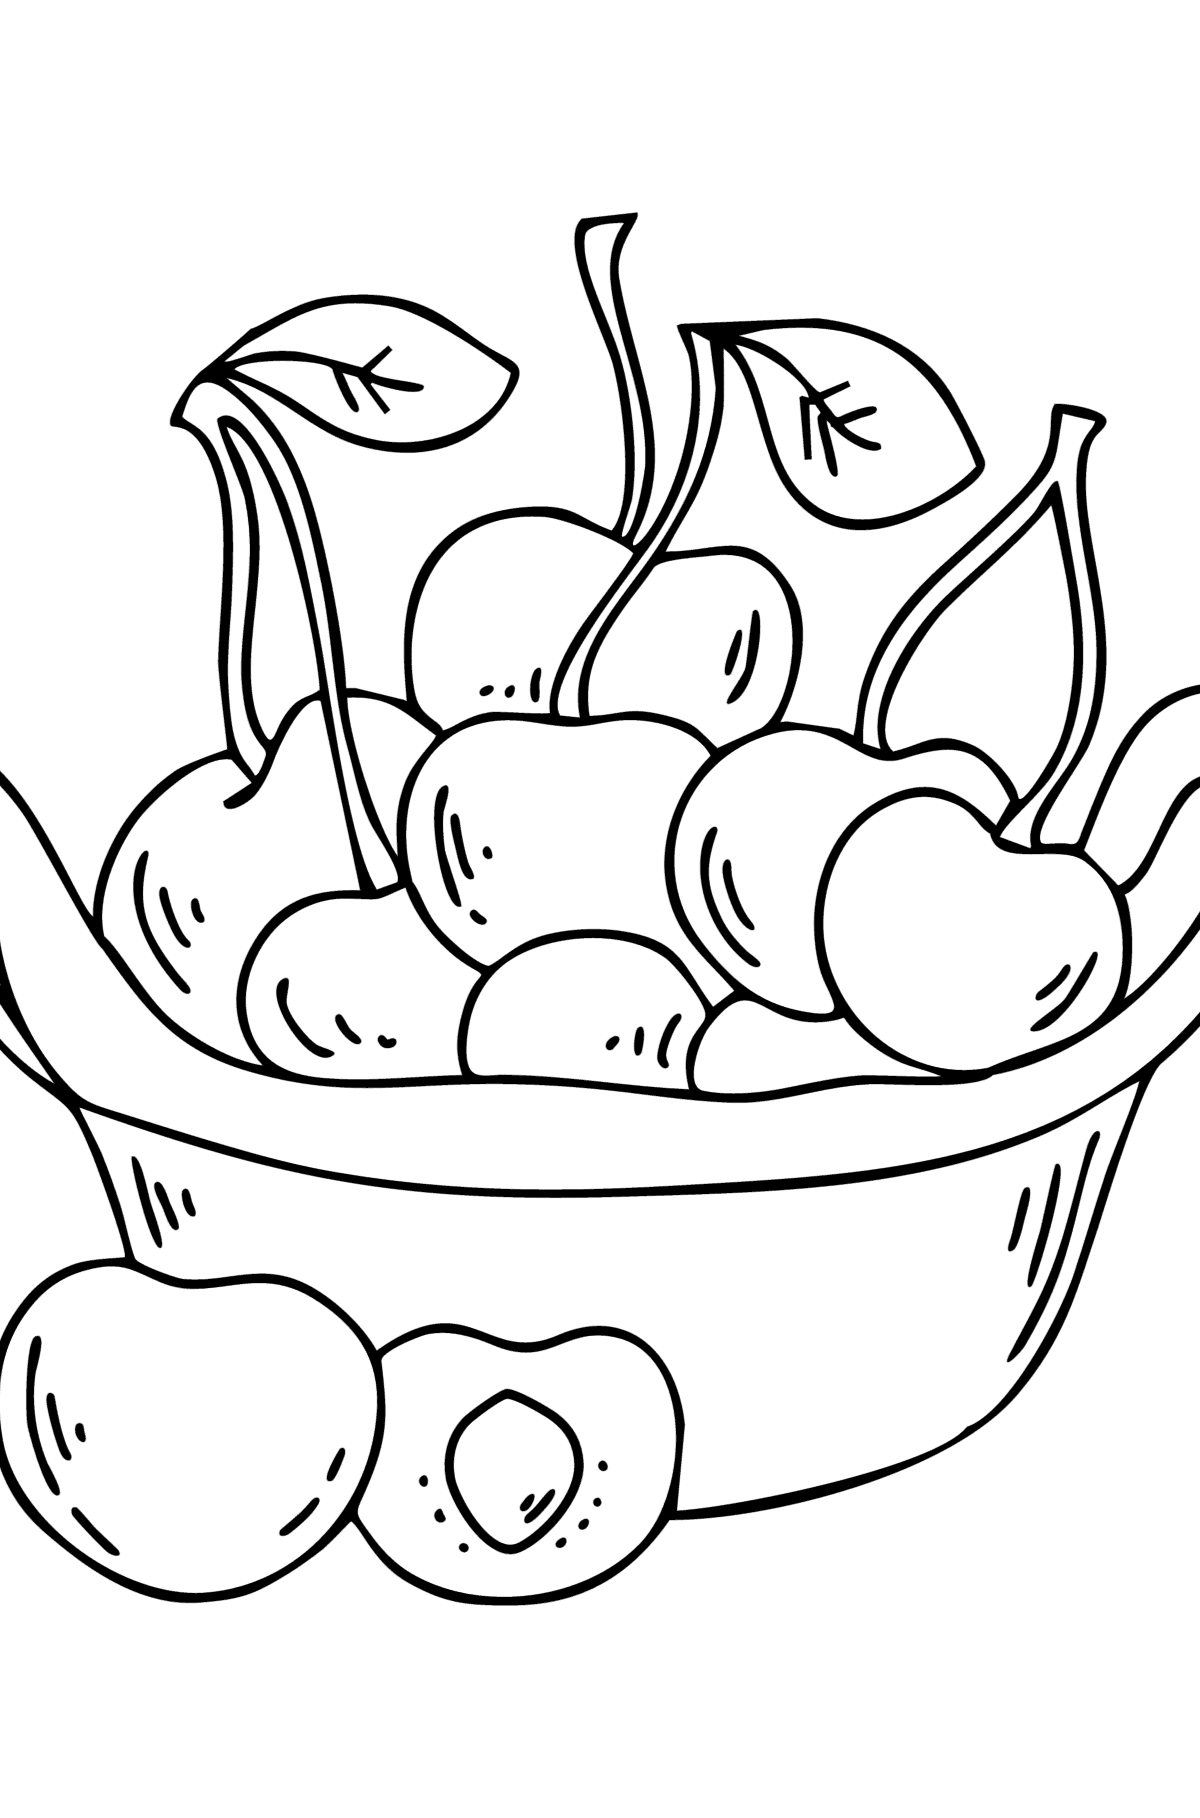 Cherries Plate Coloring Page - Coloring Pages for Kids